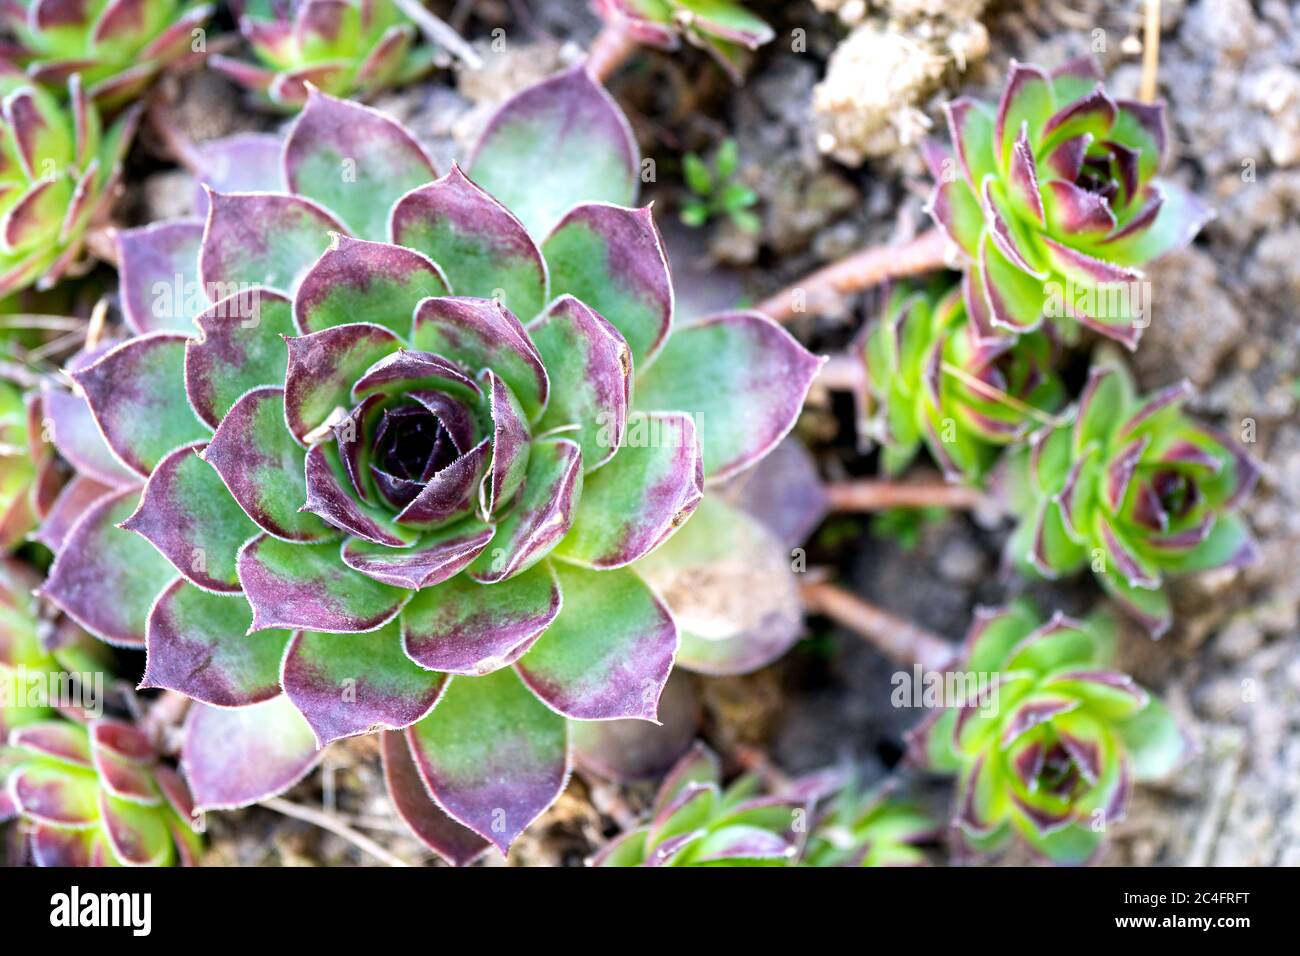 Sempervivum flower with three little appendages growing in garden bed. View from above. Stock Photo